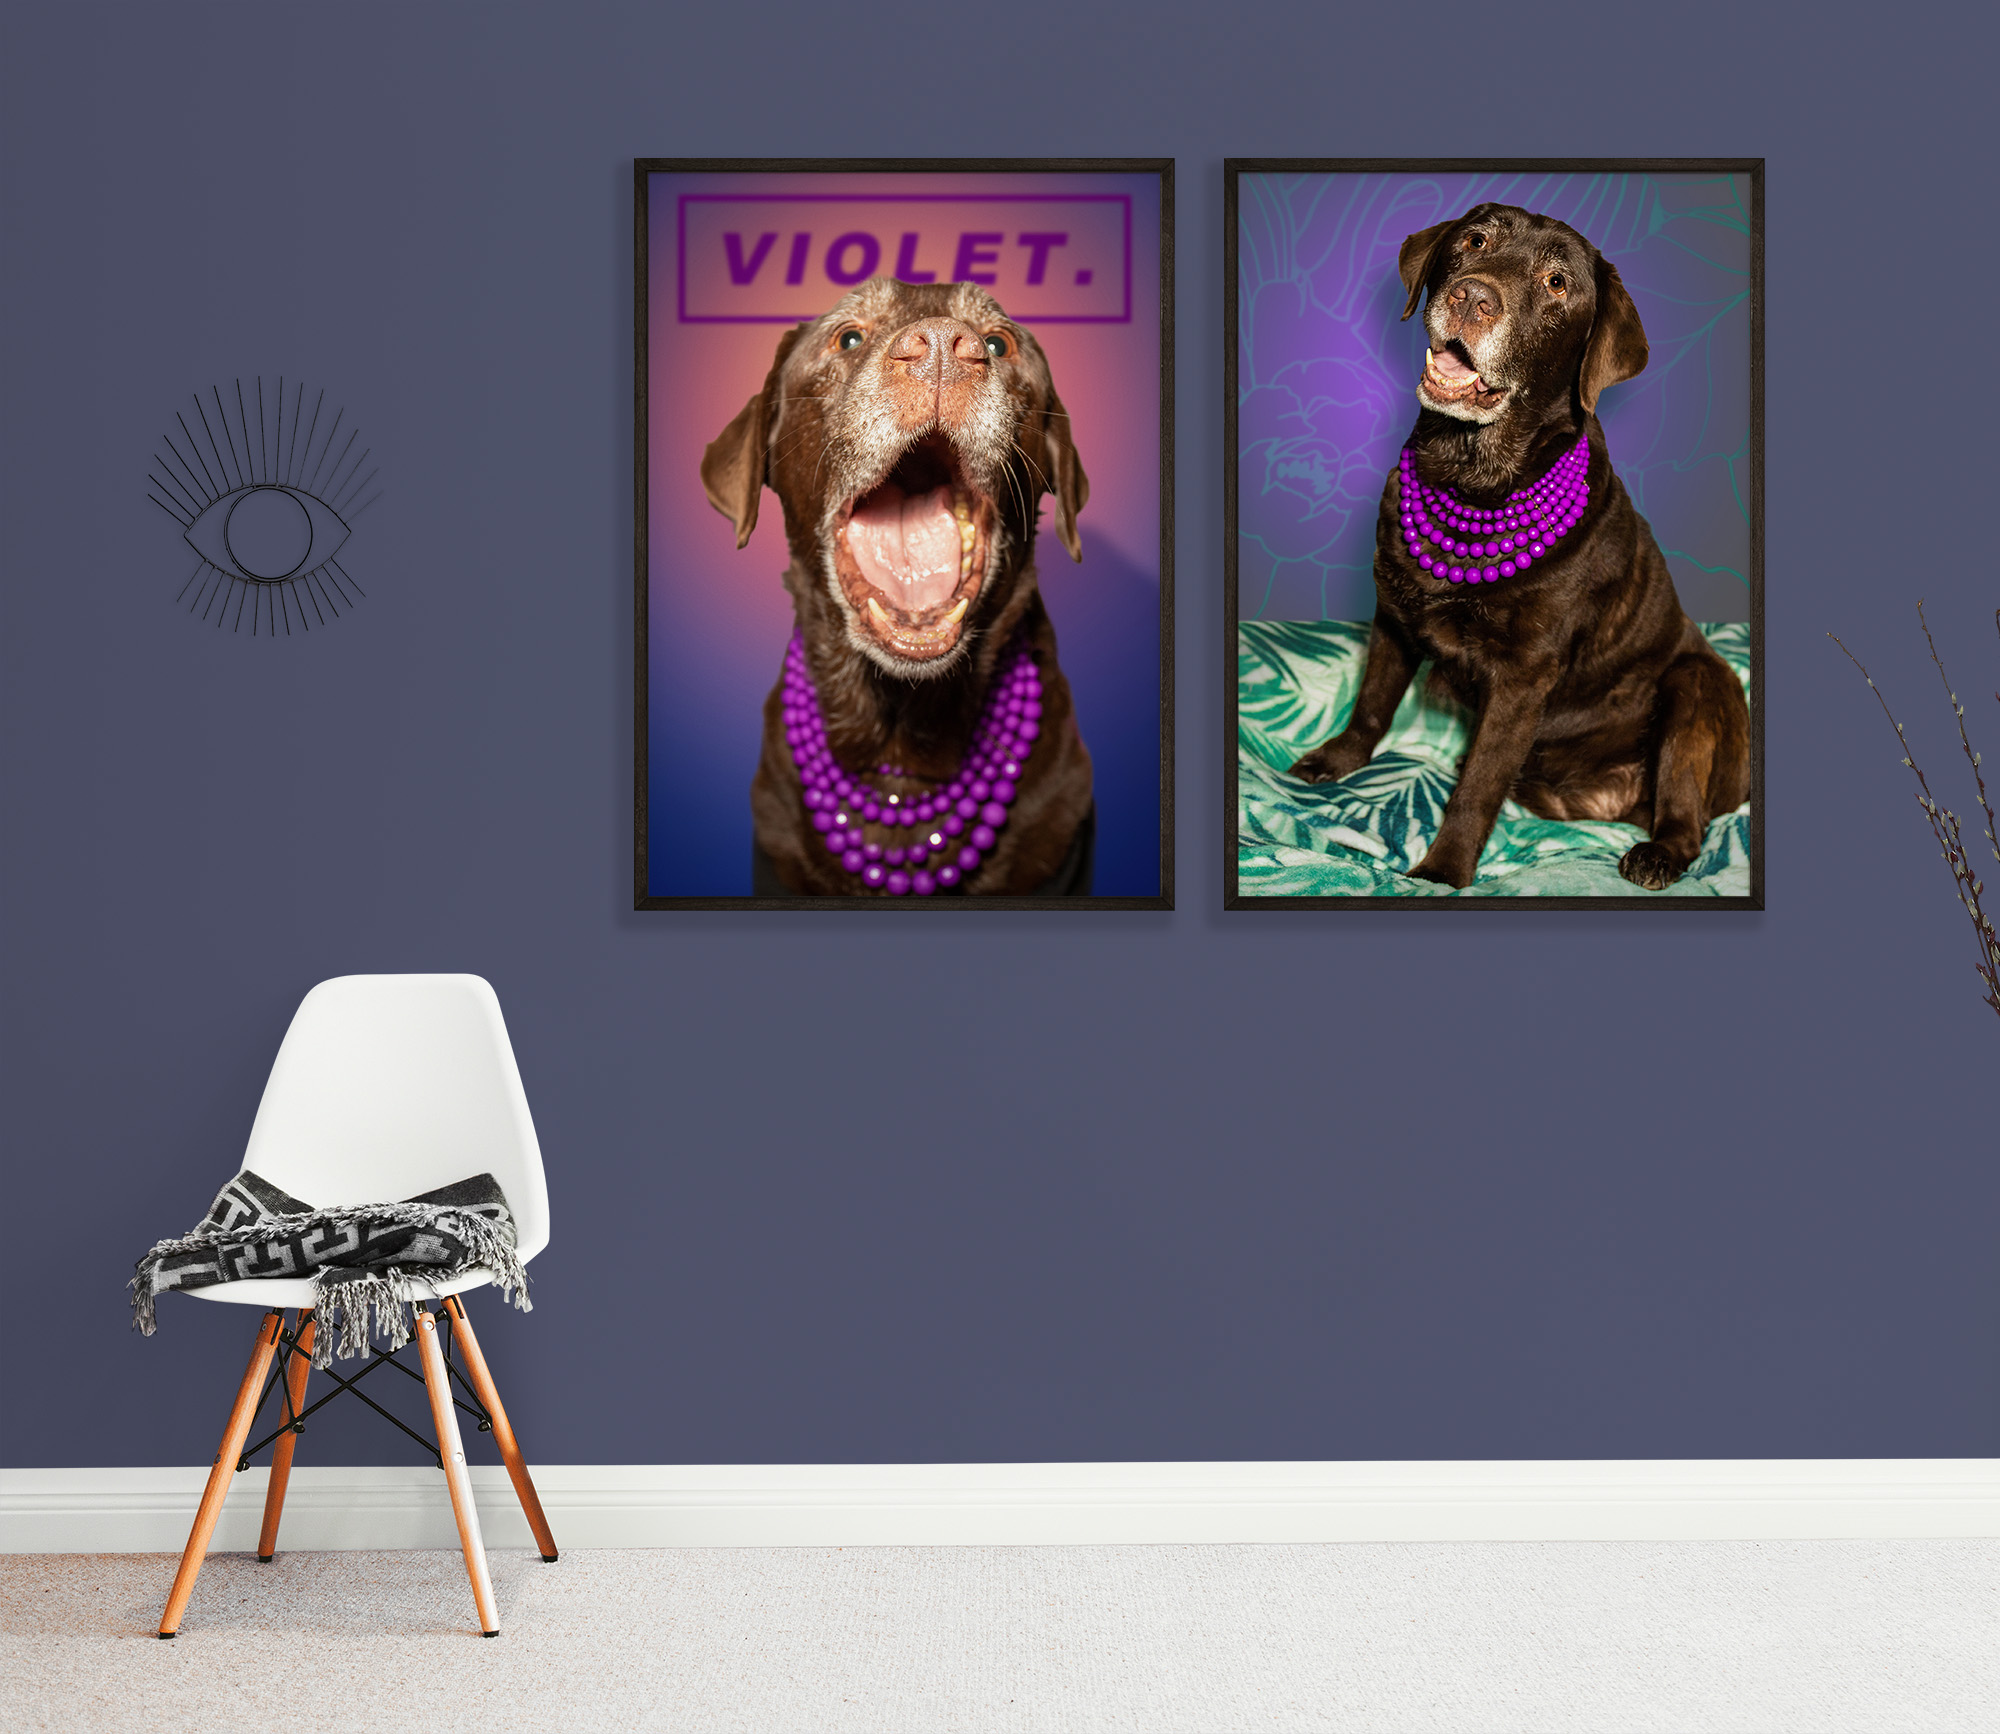 Violet the chocolate lab in a room with a chair and her purple pearls.